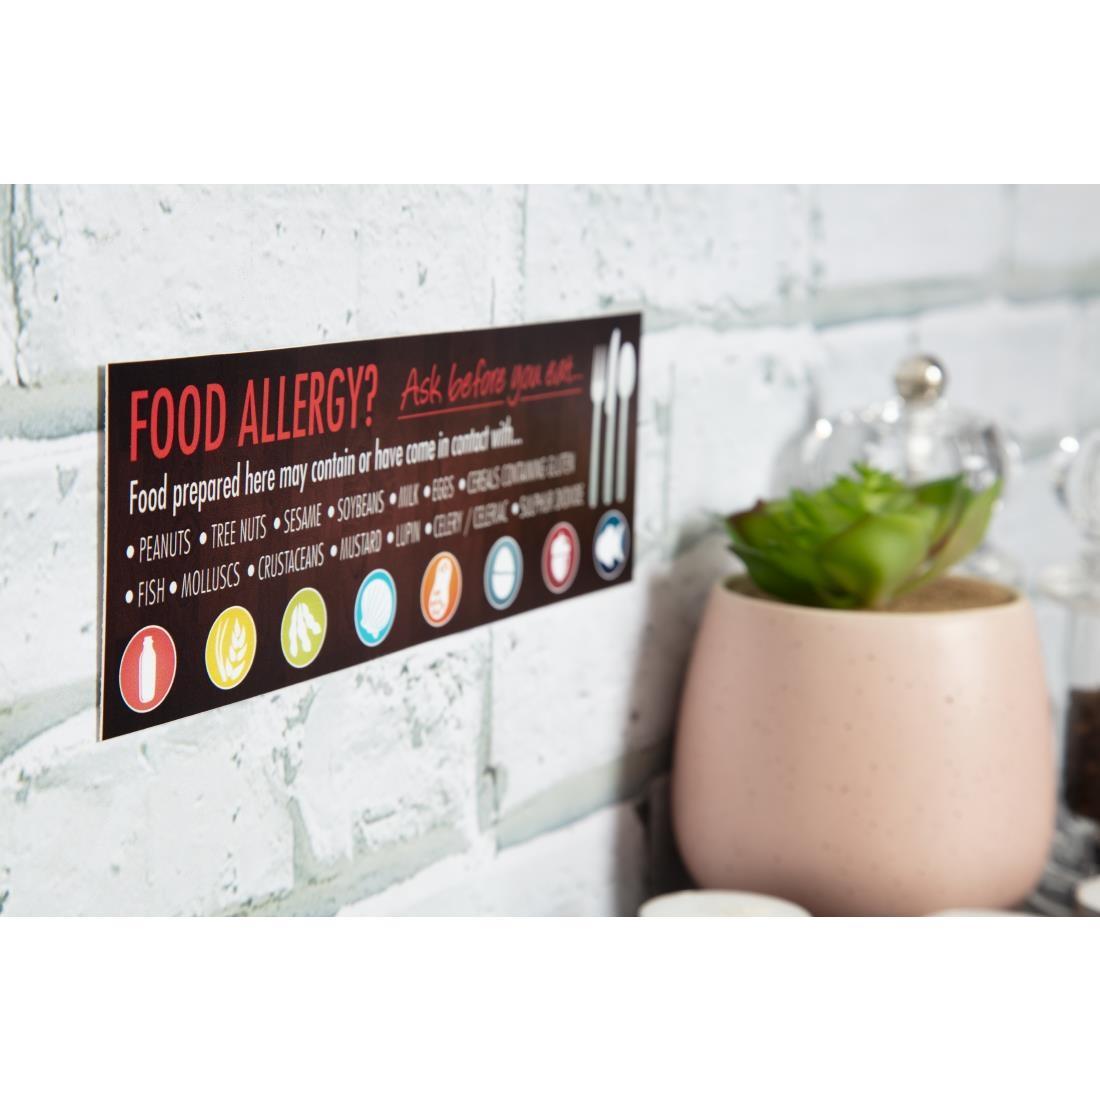 Food Allergen Window and Wall Stickers (Pack of 8) - GM818  - 2